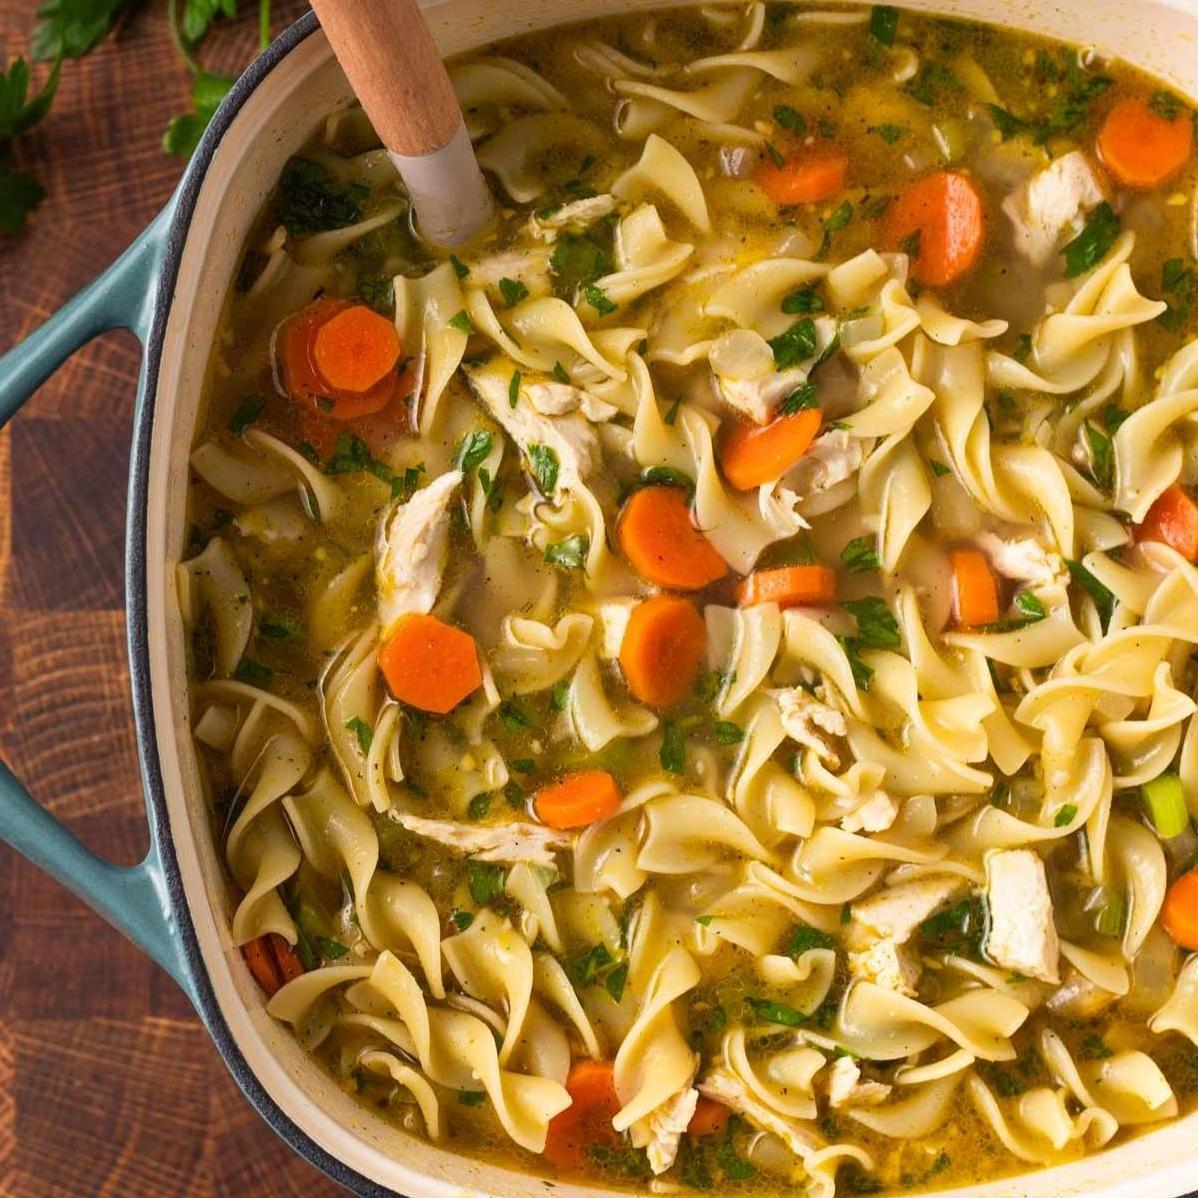  This vegetarian soup is a comforting bowl of goodness that will make you feel right at home.